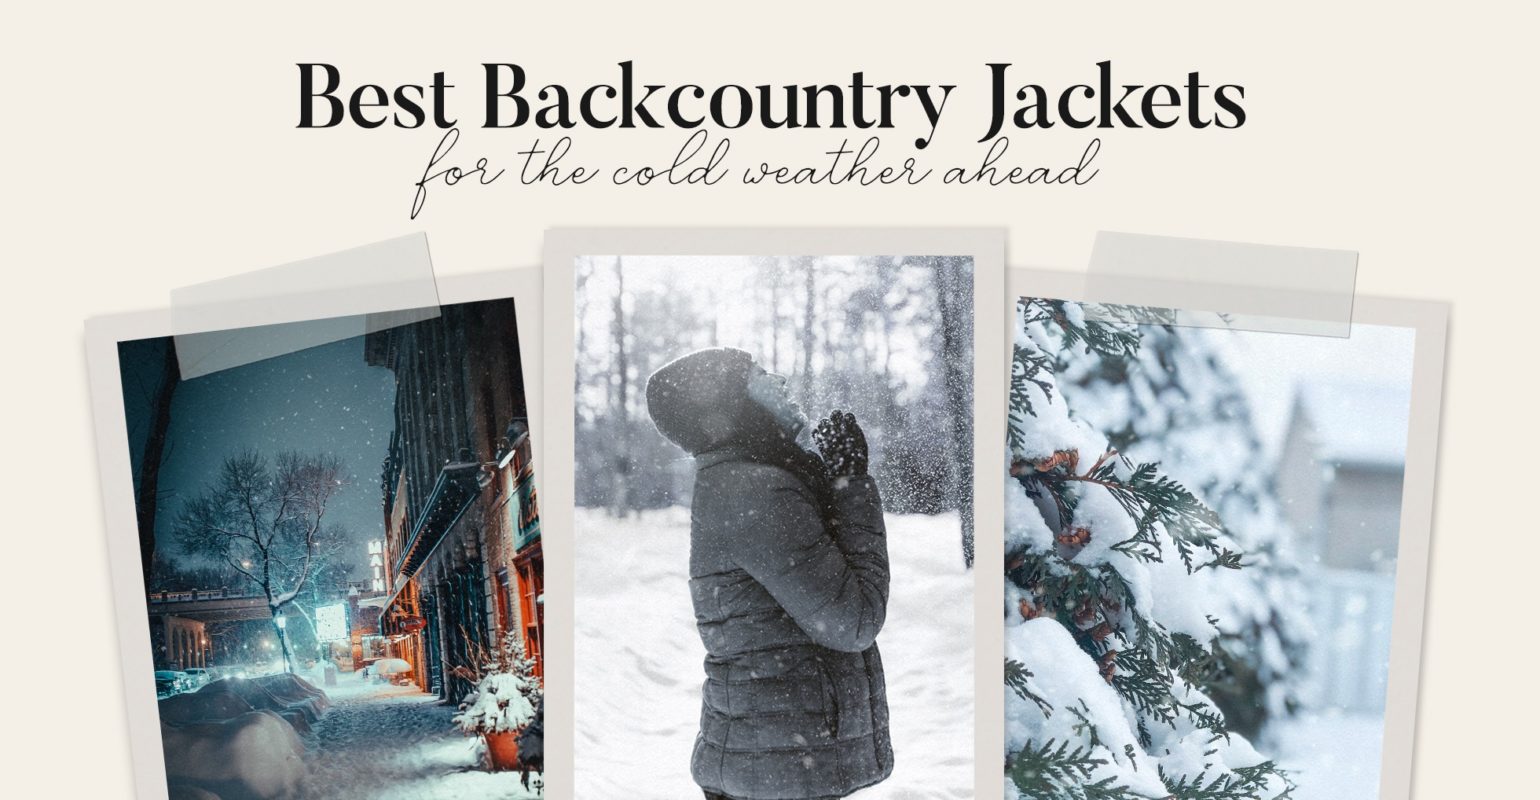 Best Backcountry Jackets Review